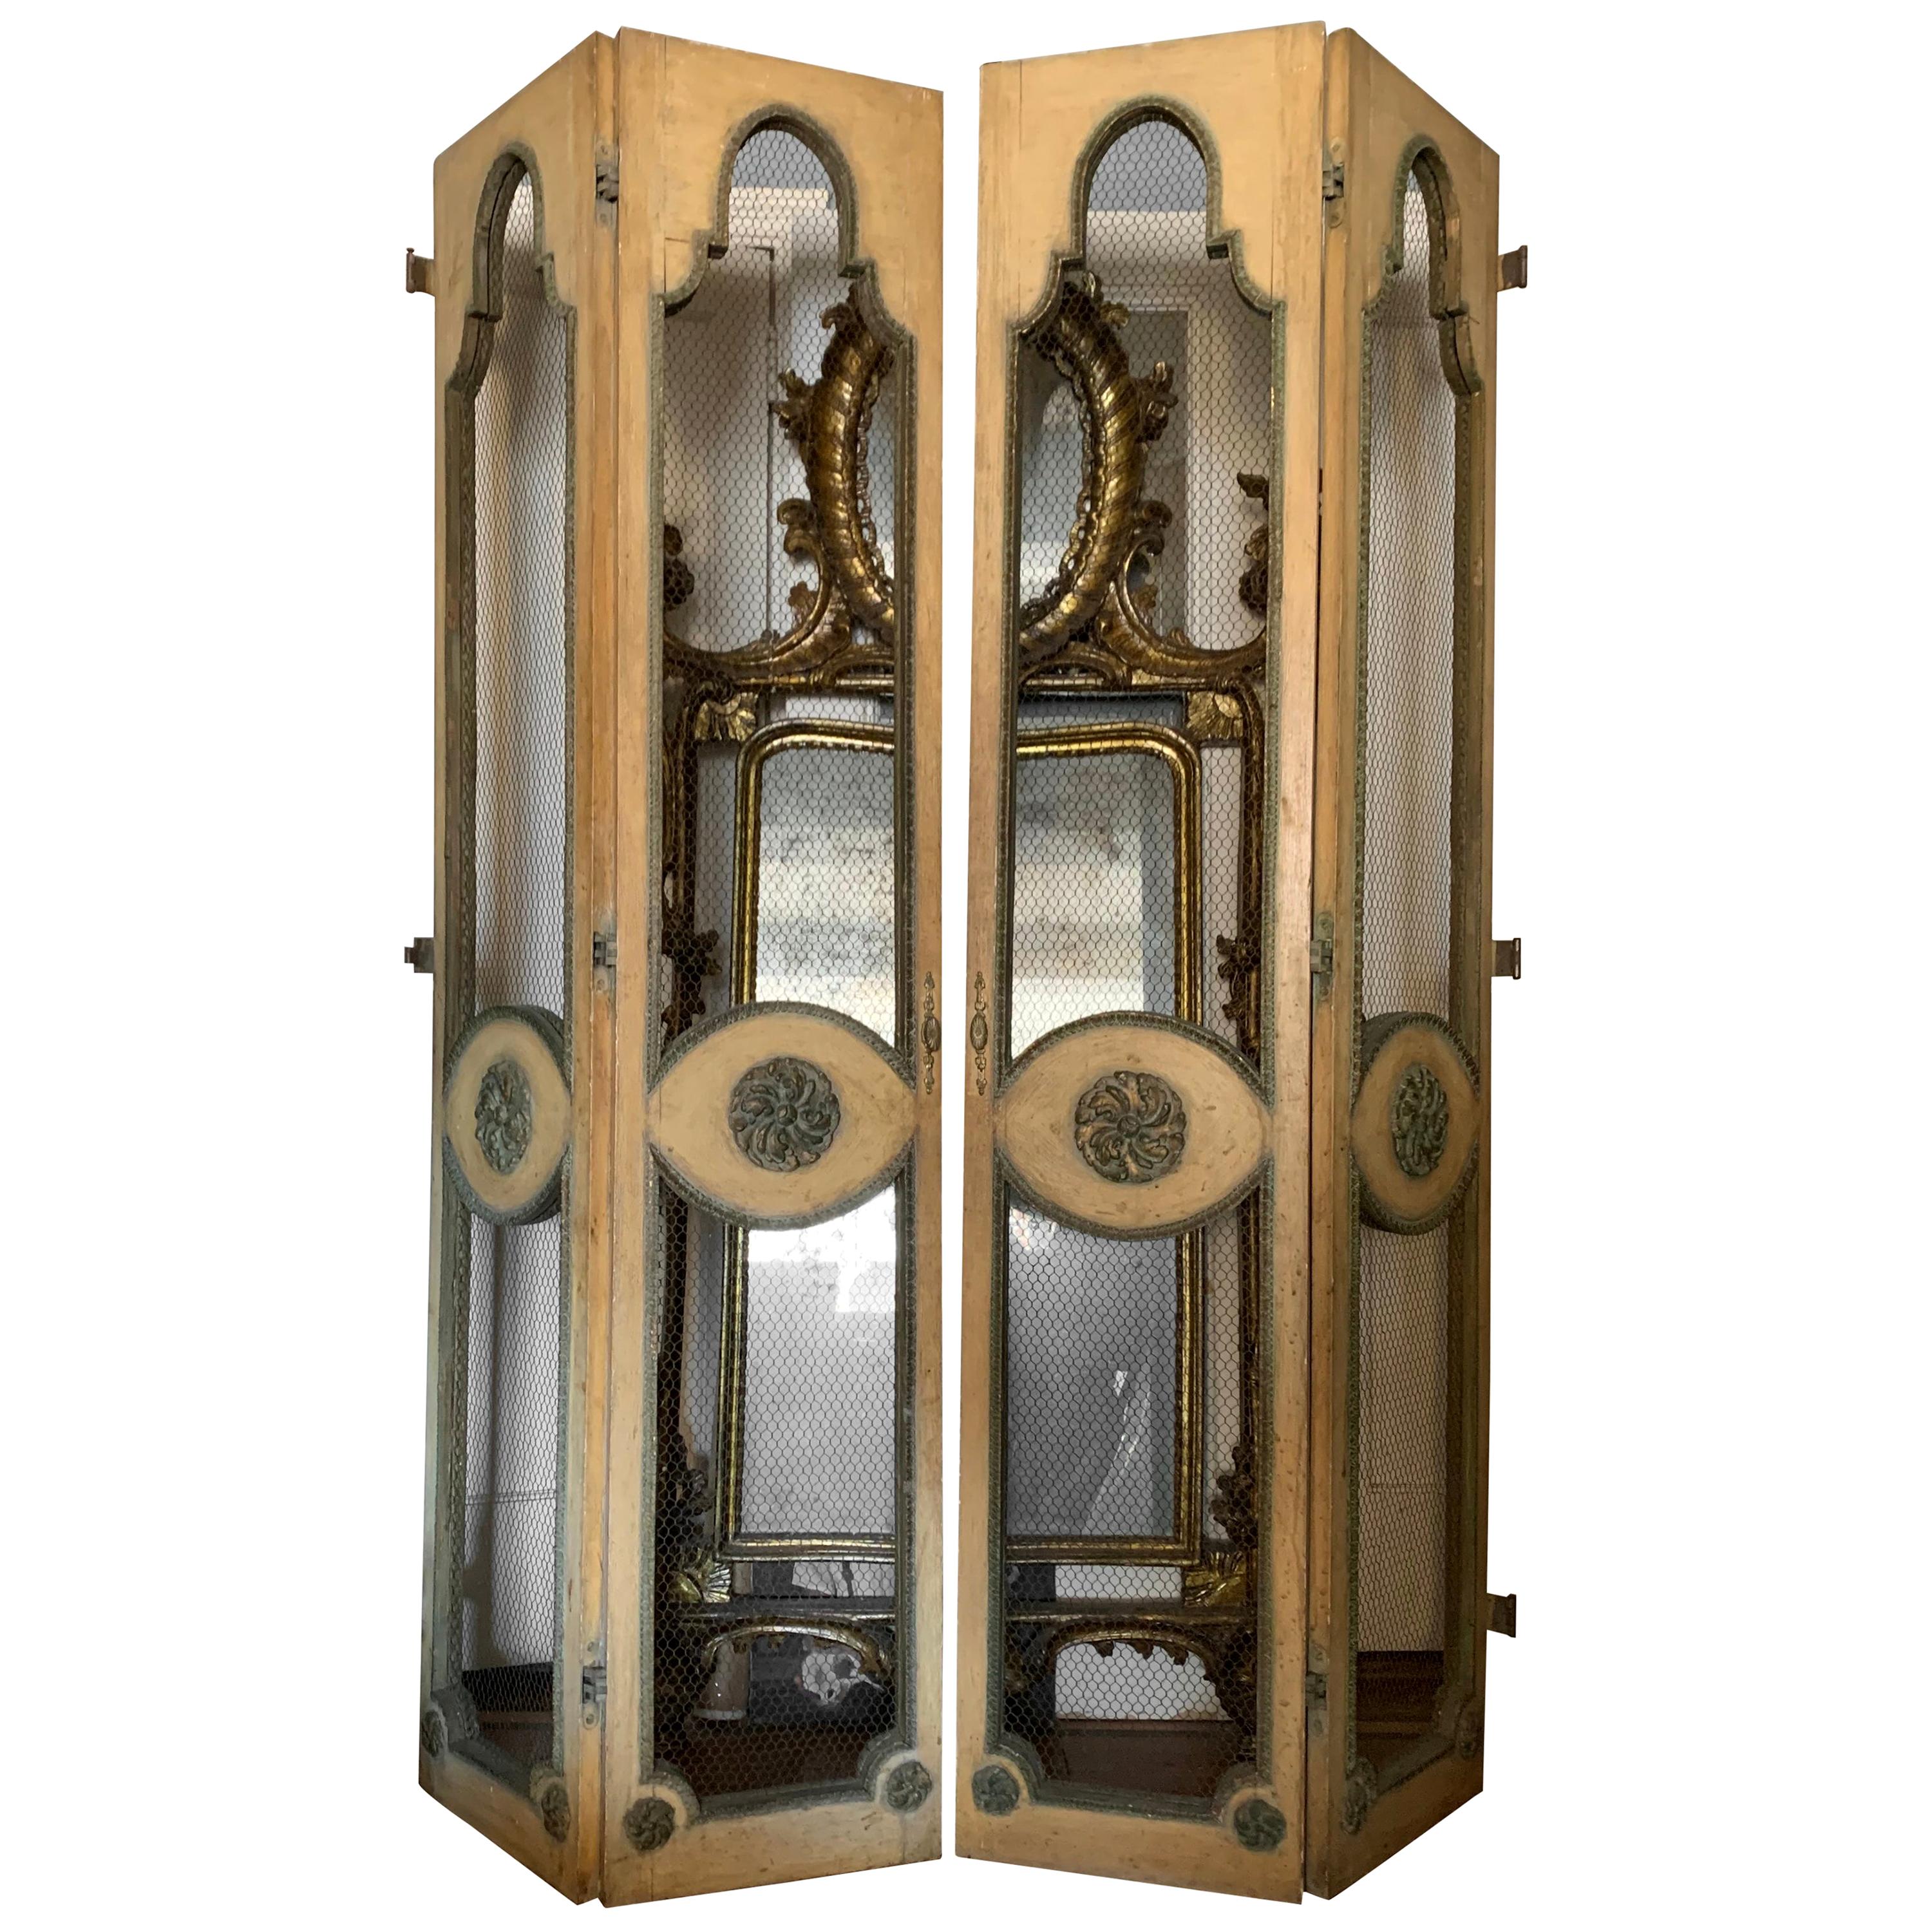 Venetian screen room divider. Tall pair arched top double-panel painted and gilt carved wood doors with wire insets finished on both sides with original hardware and hinges, American, circa 1920s.
Dimensions: 60